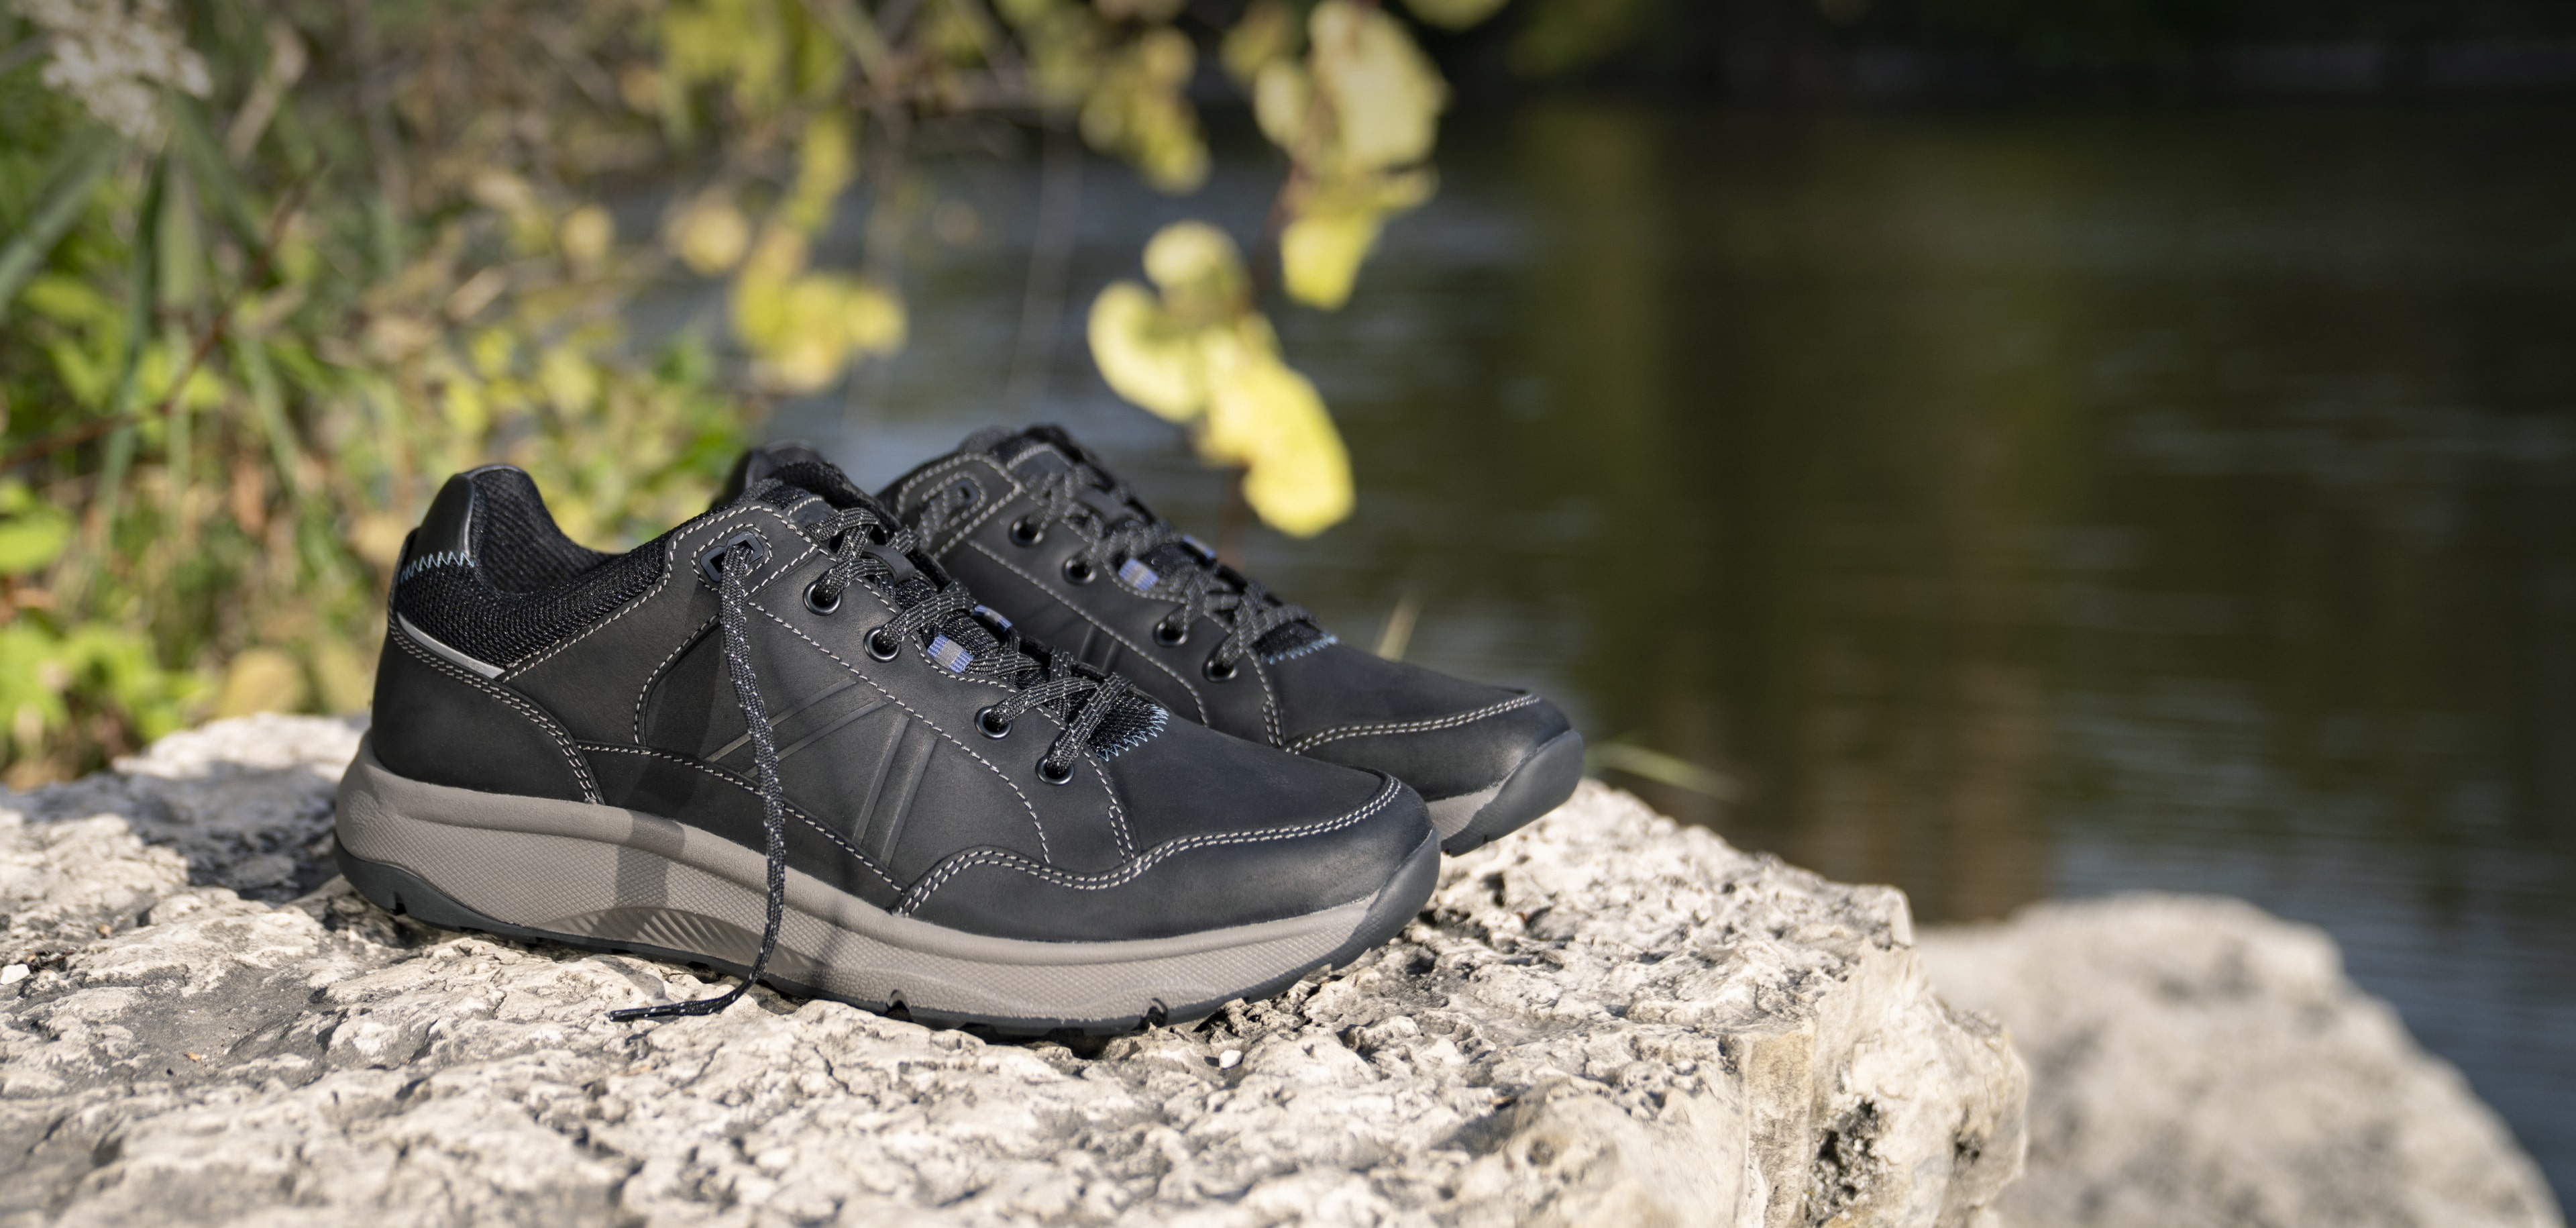 Click to shop Florsheim new arrivals. Image features the Tread Lite sneaker in black.